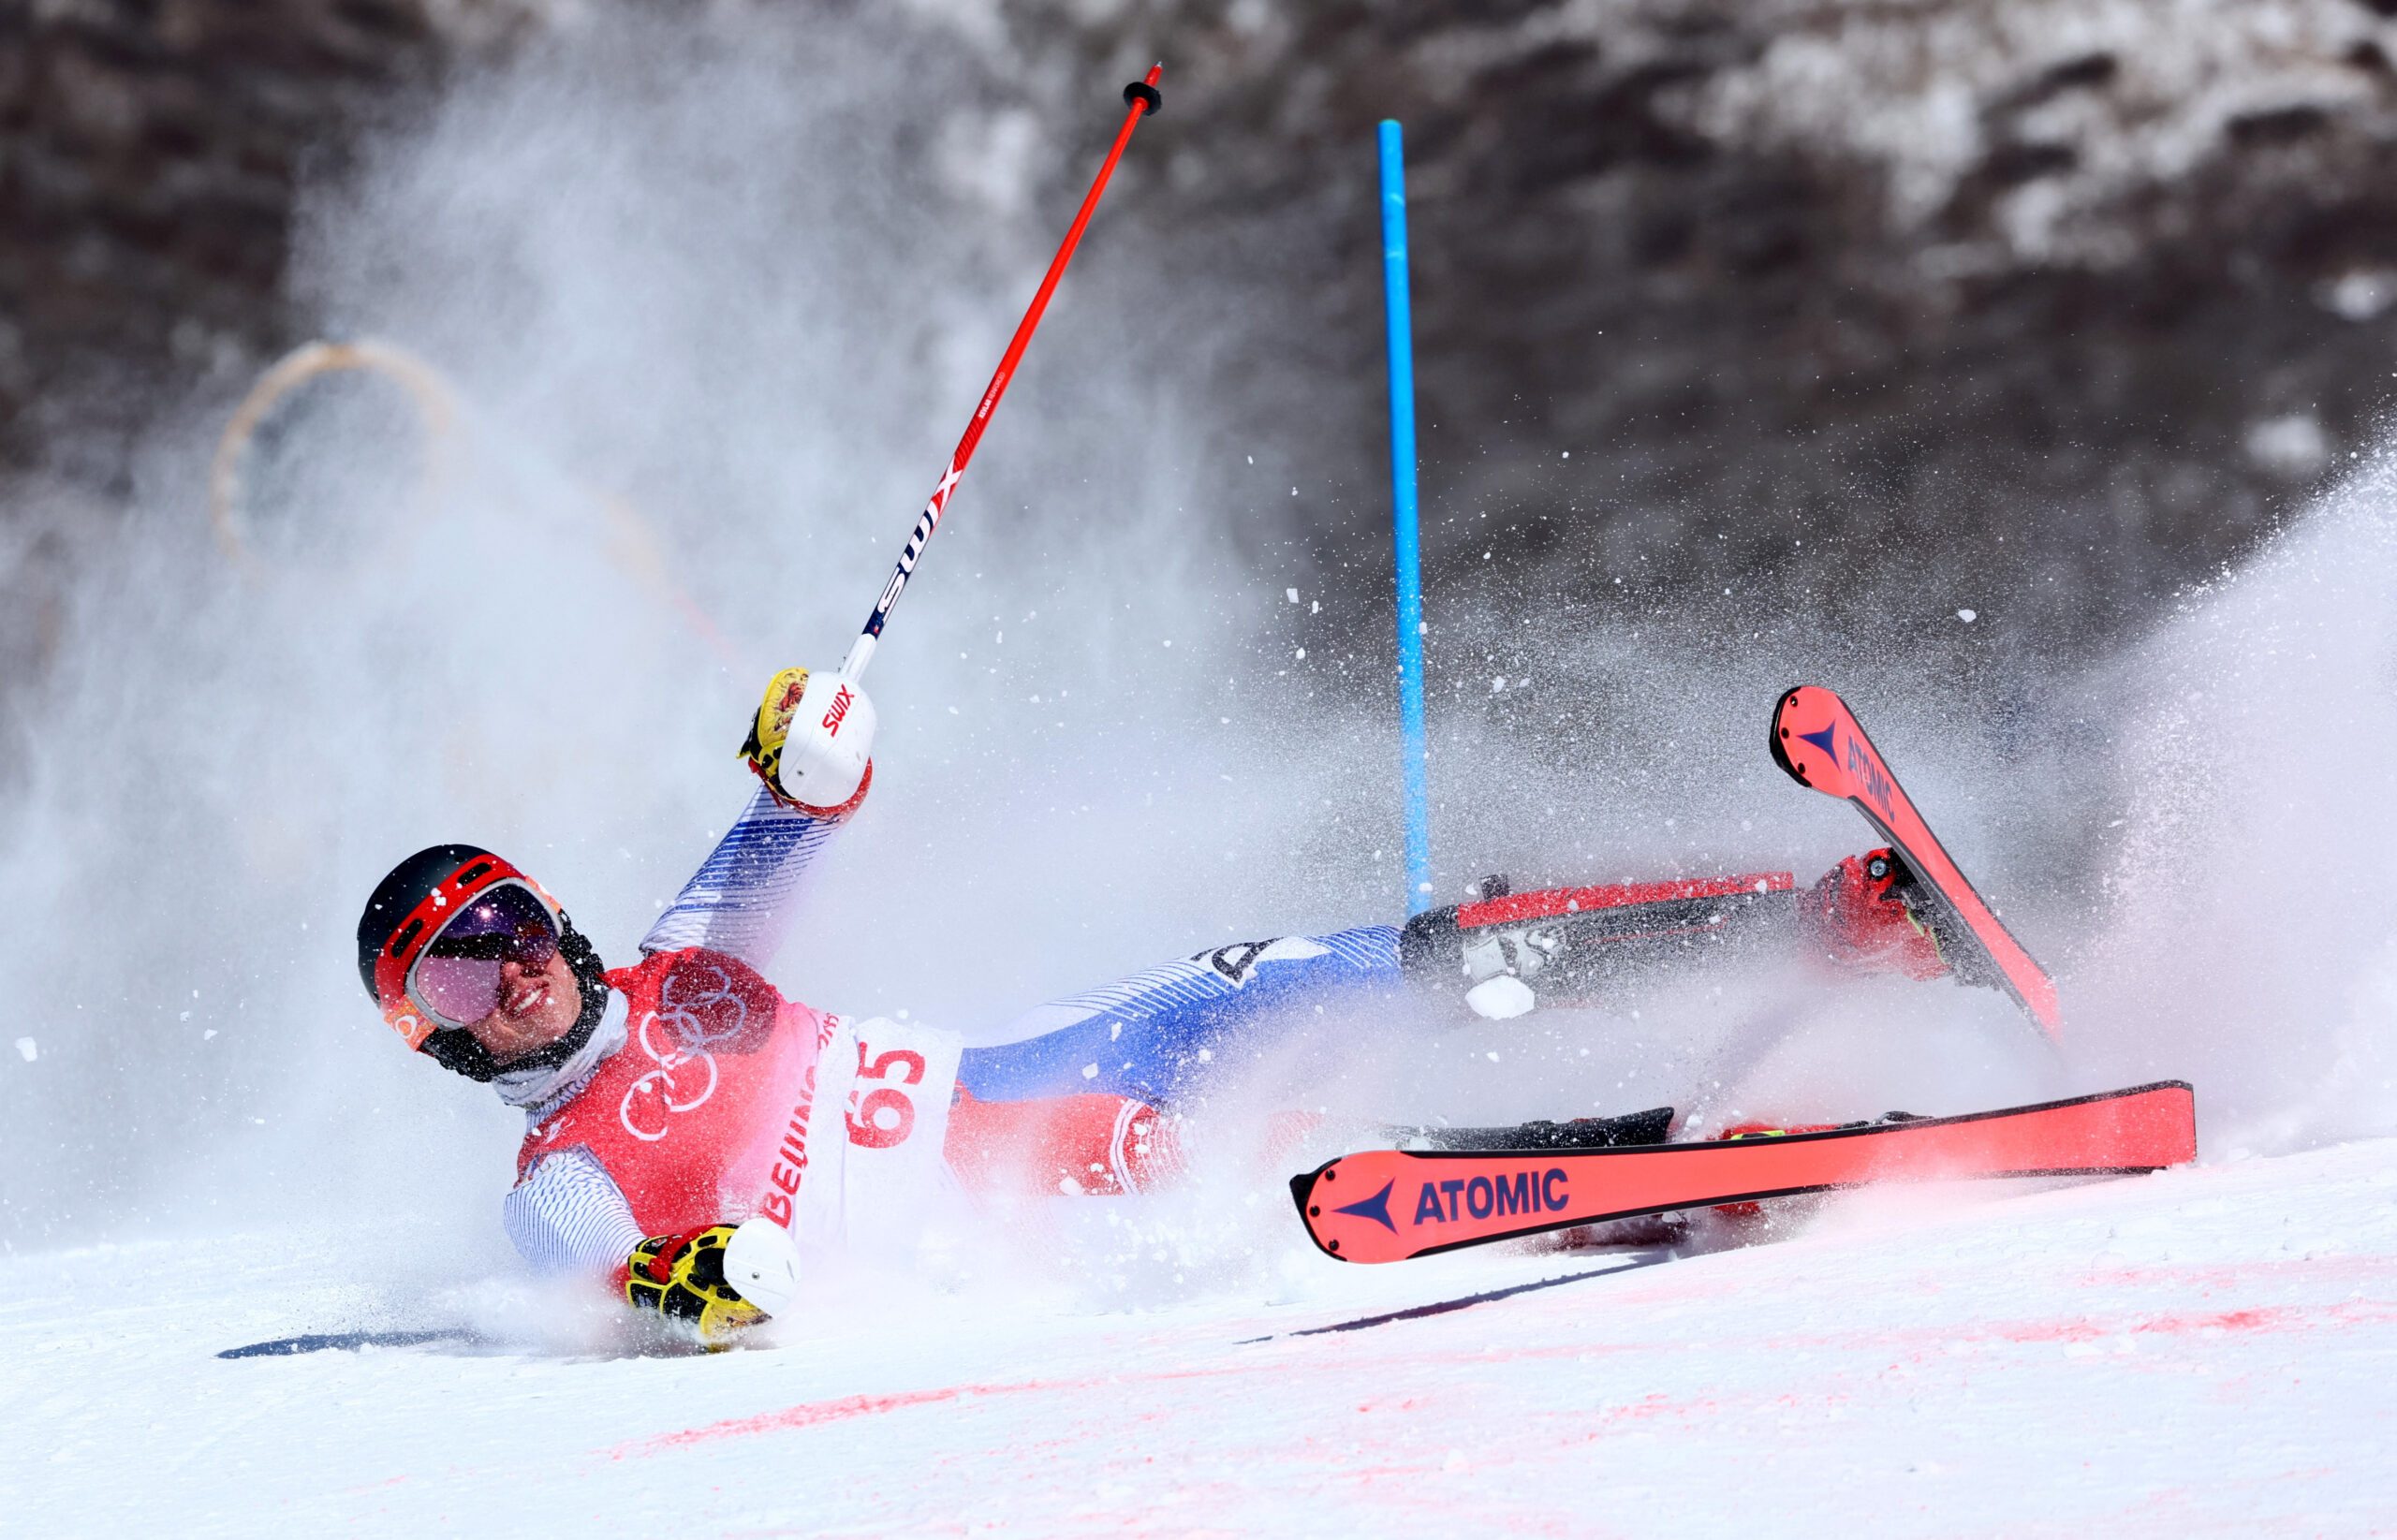 Asa Miller wraps up Winter Olympics stint with repeat DNF